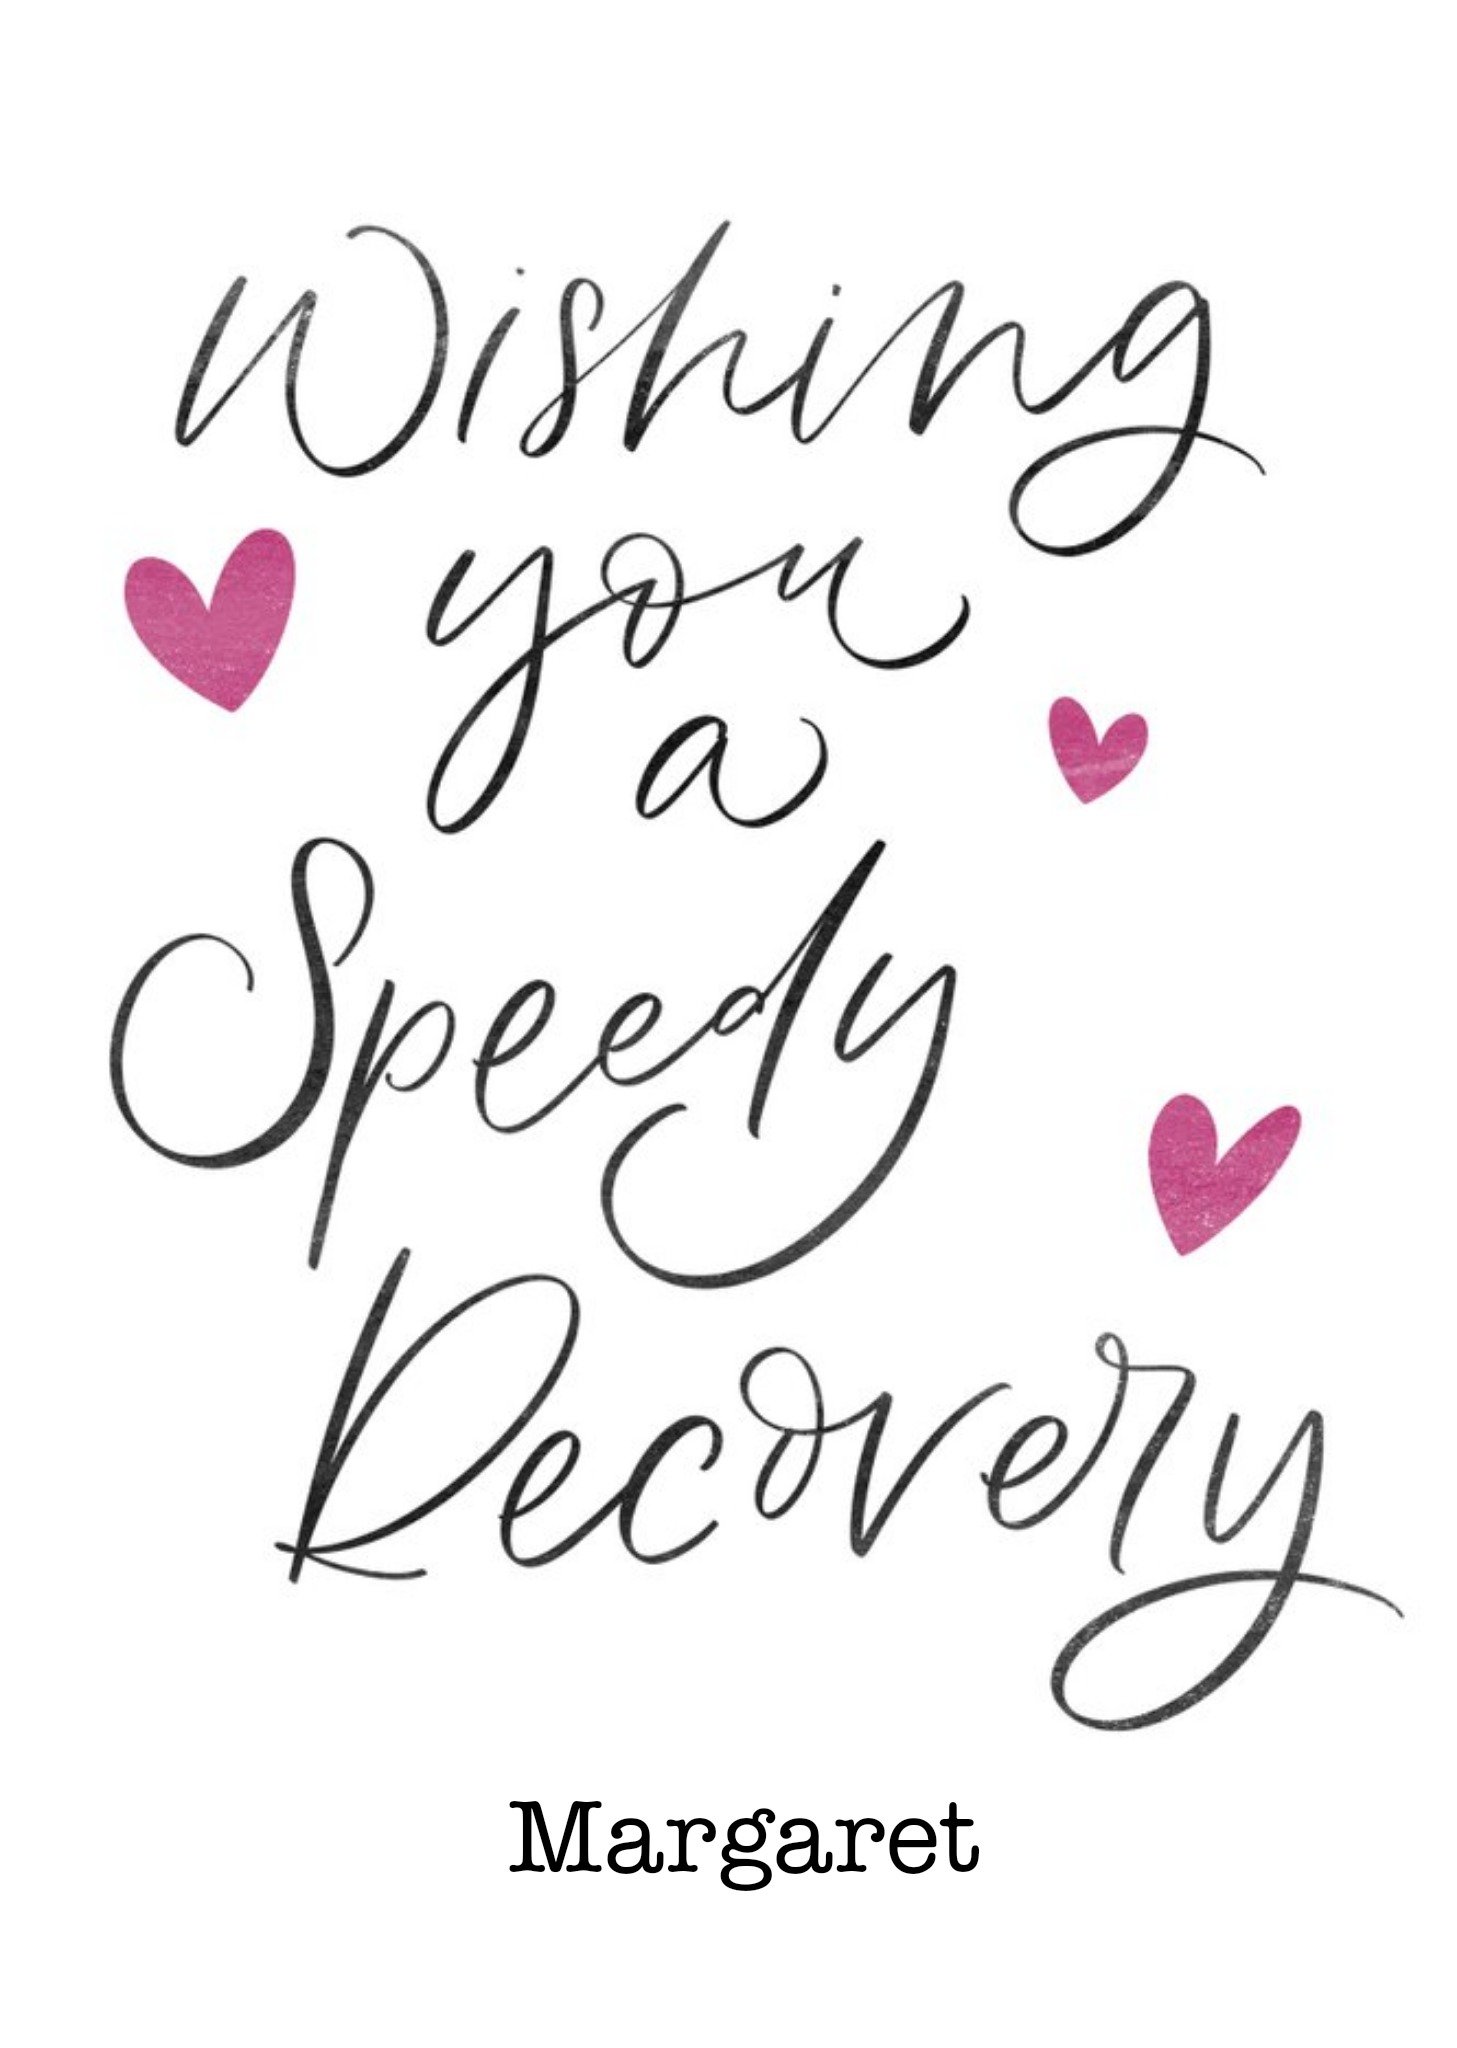 Moonpig Wishing You A Speedy Recovery Get Well Card Ecard